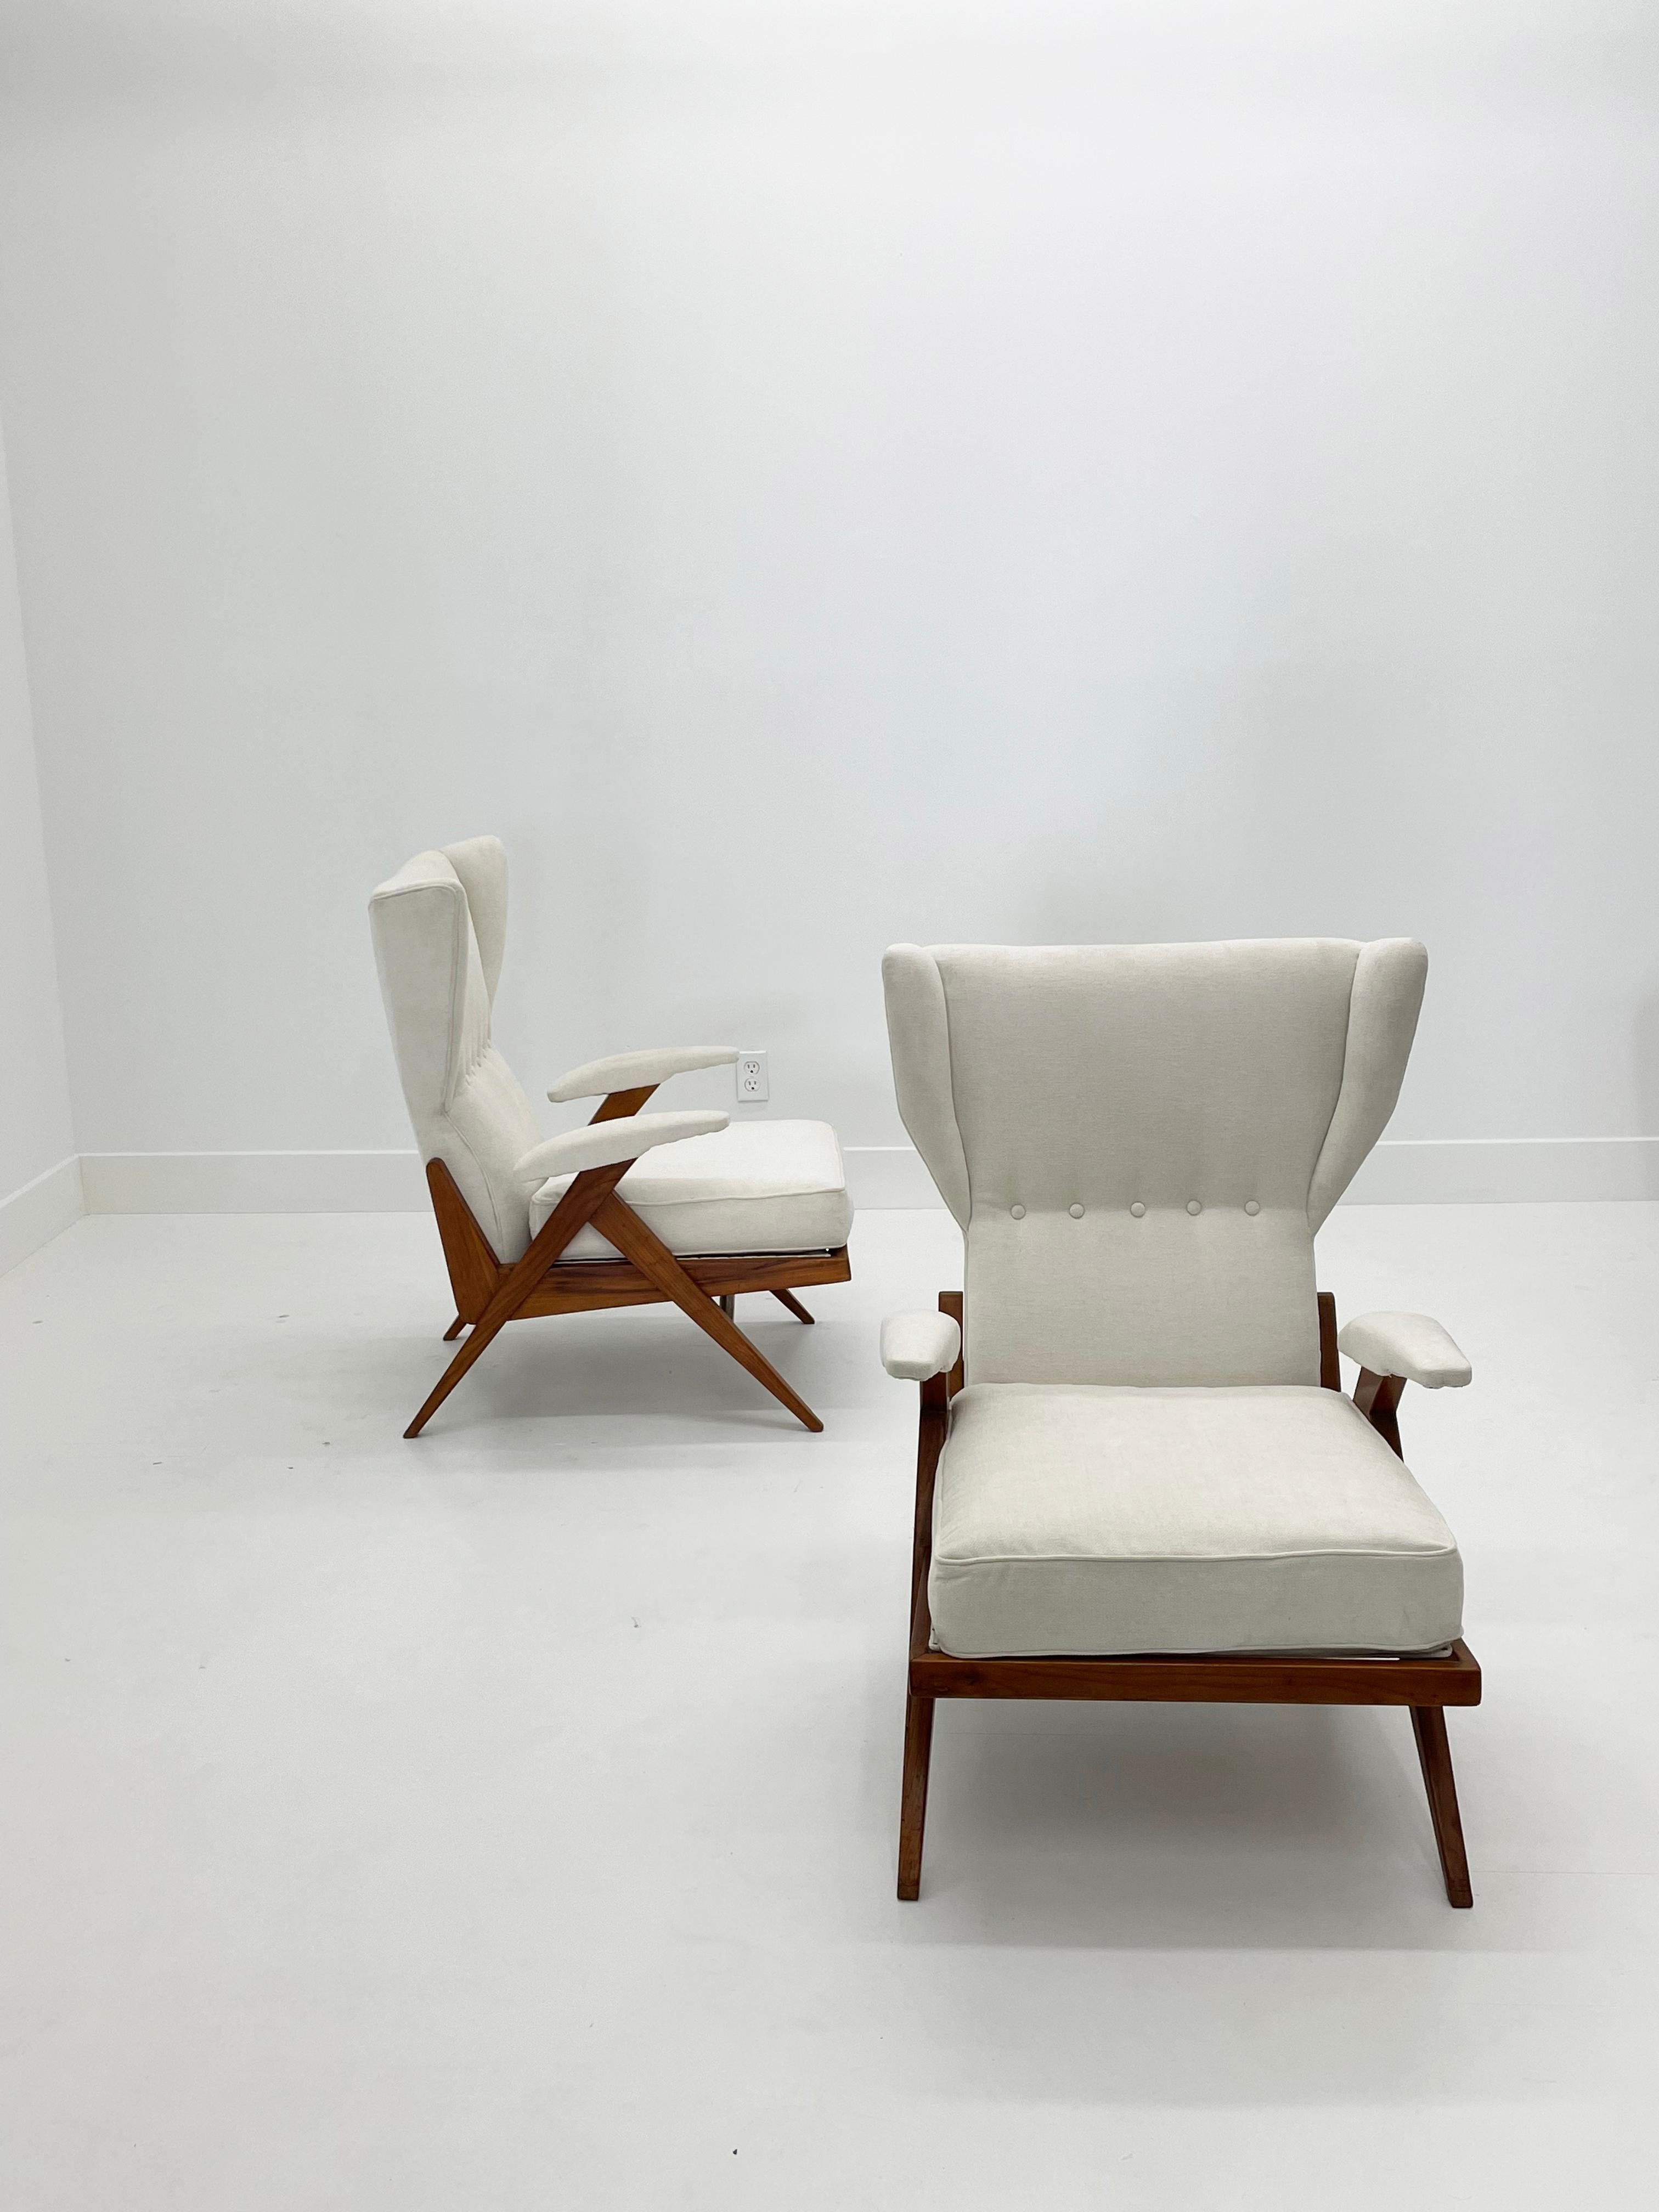 20th Century Mid-century Wingback Recliner Lounge Chairs, Renzo Franchi, 1950's, Italy  For Sale